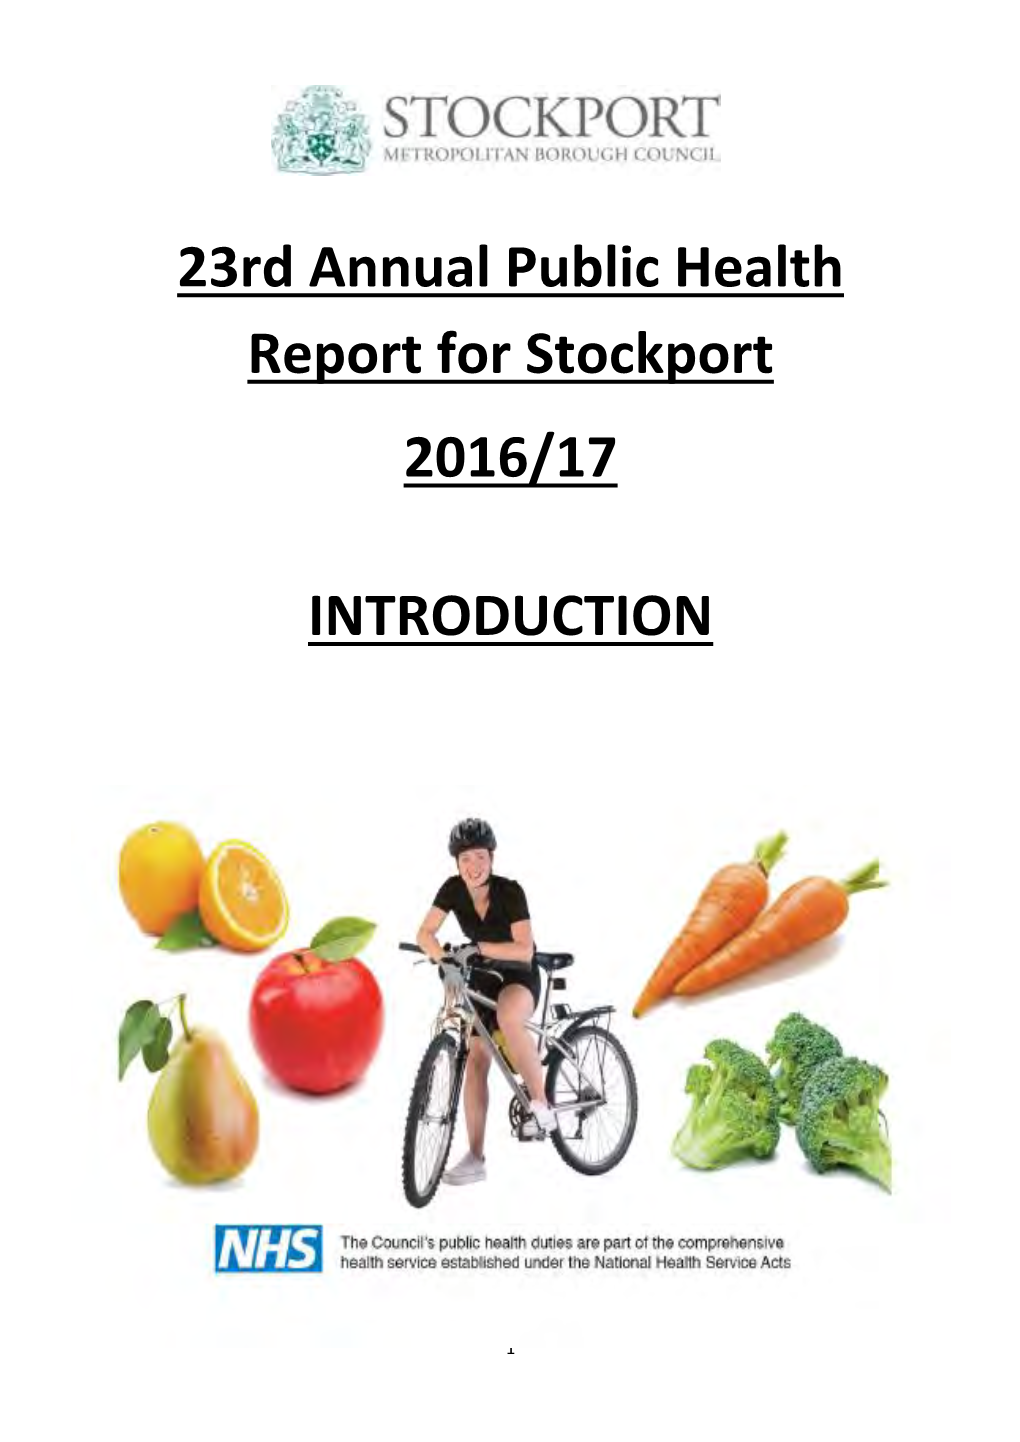 23Rd Annual Public Health Report for Stockport 2016/17